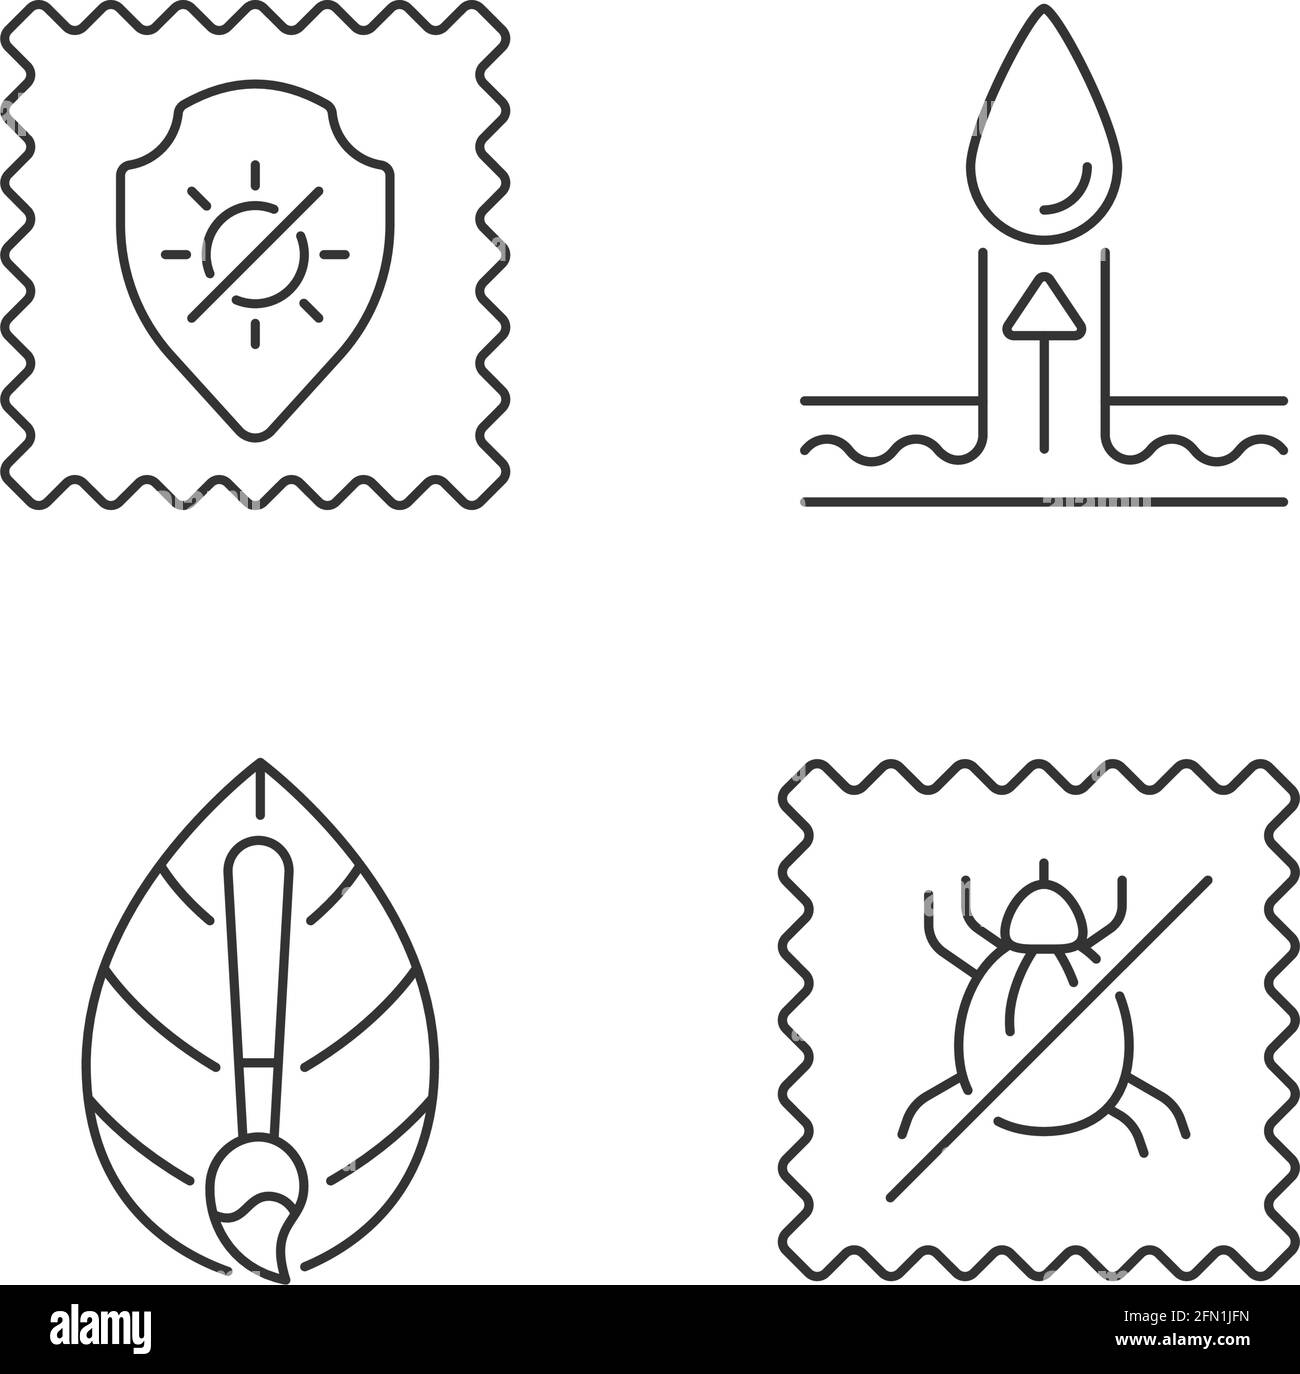 Fabric quality characteristics linear icons set Stock Vector